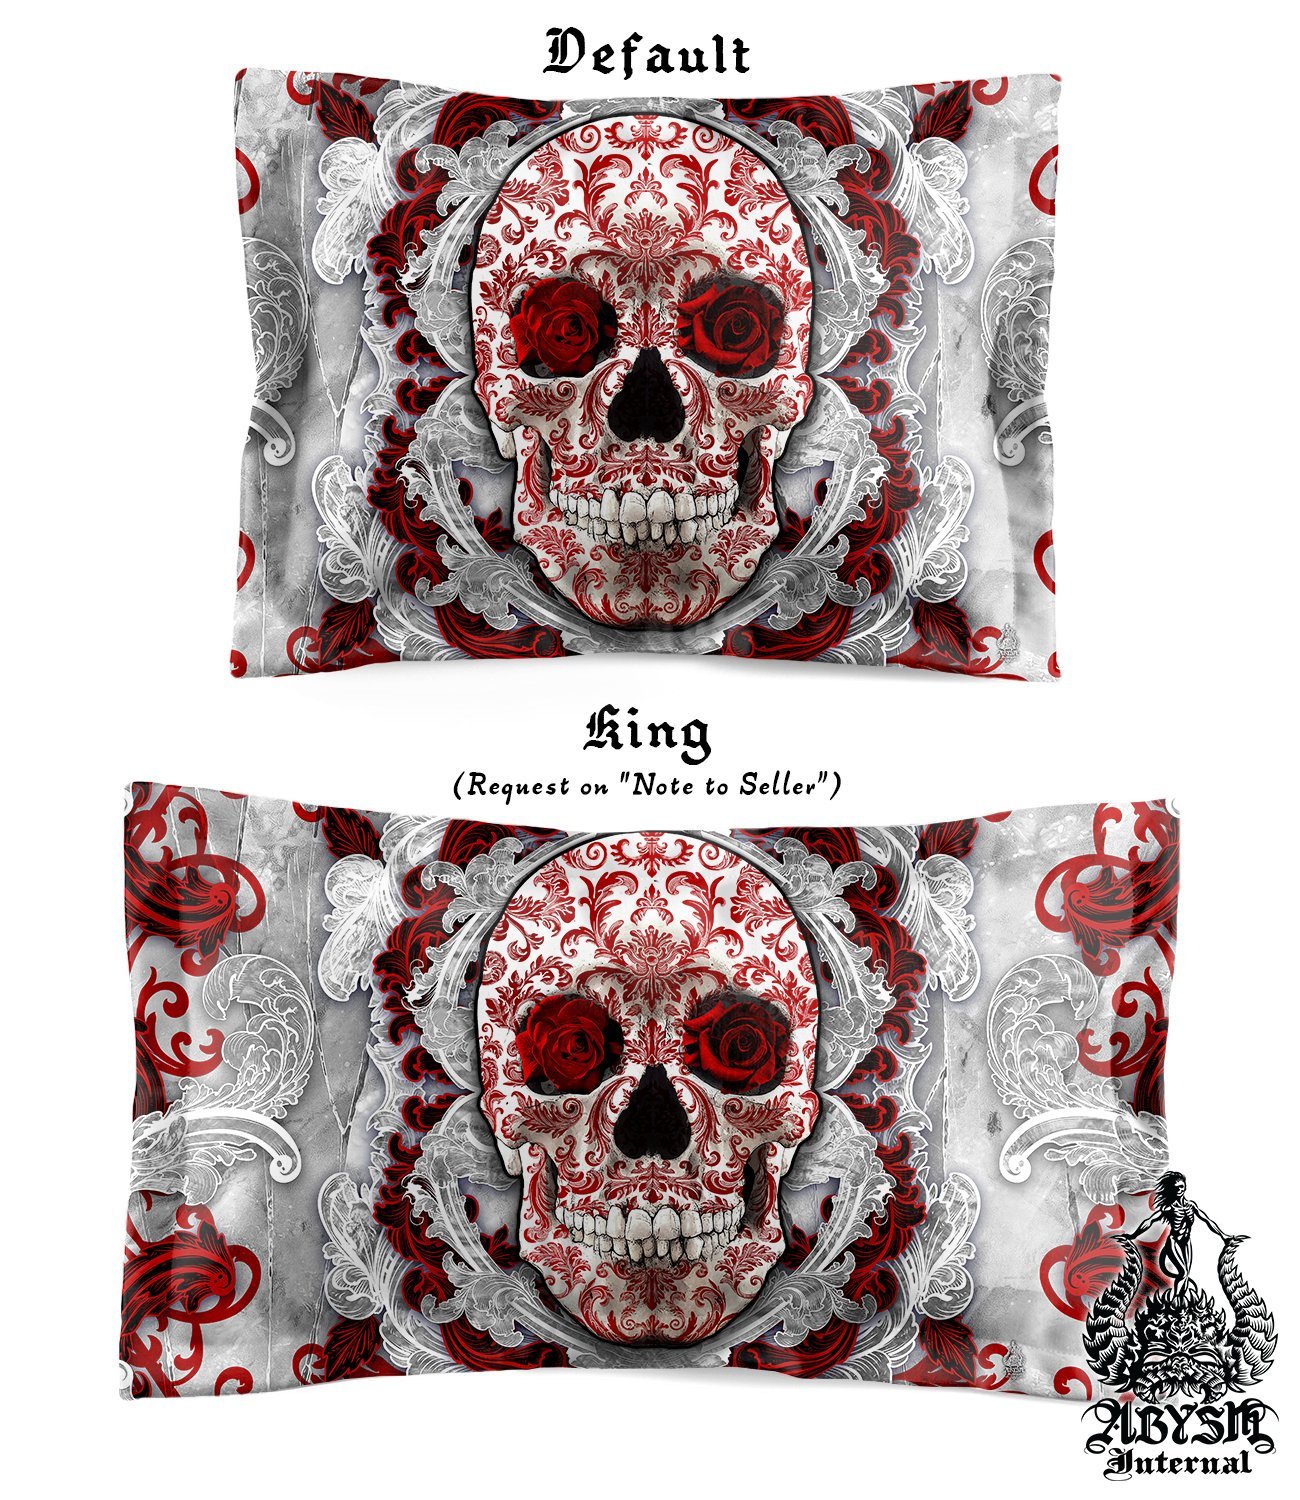 White Goth Bedding Set, Comforter and Duvet, Gothic Bed Cover and Bedroom Decor, King, Queen and Twin Size - Bloody Skull and Black Roses, - Abysm Internal